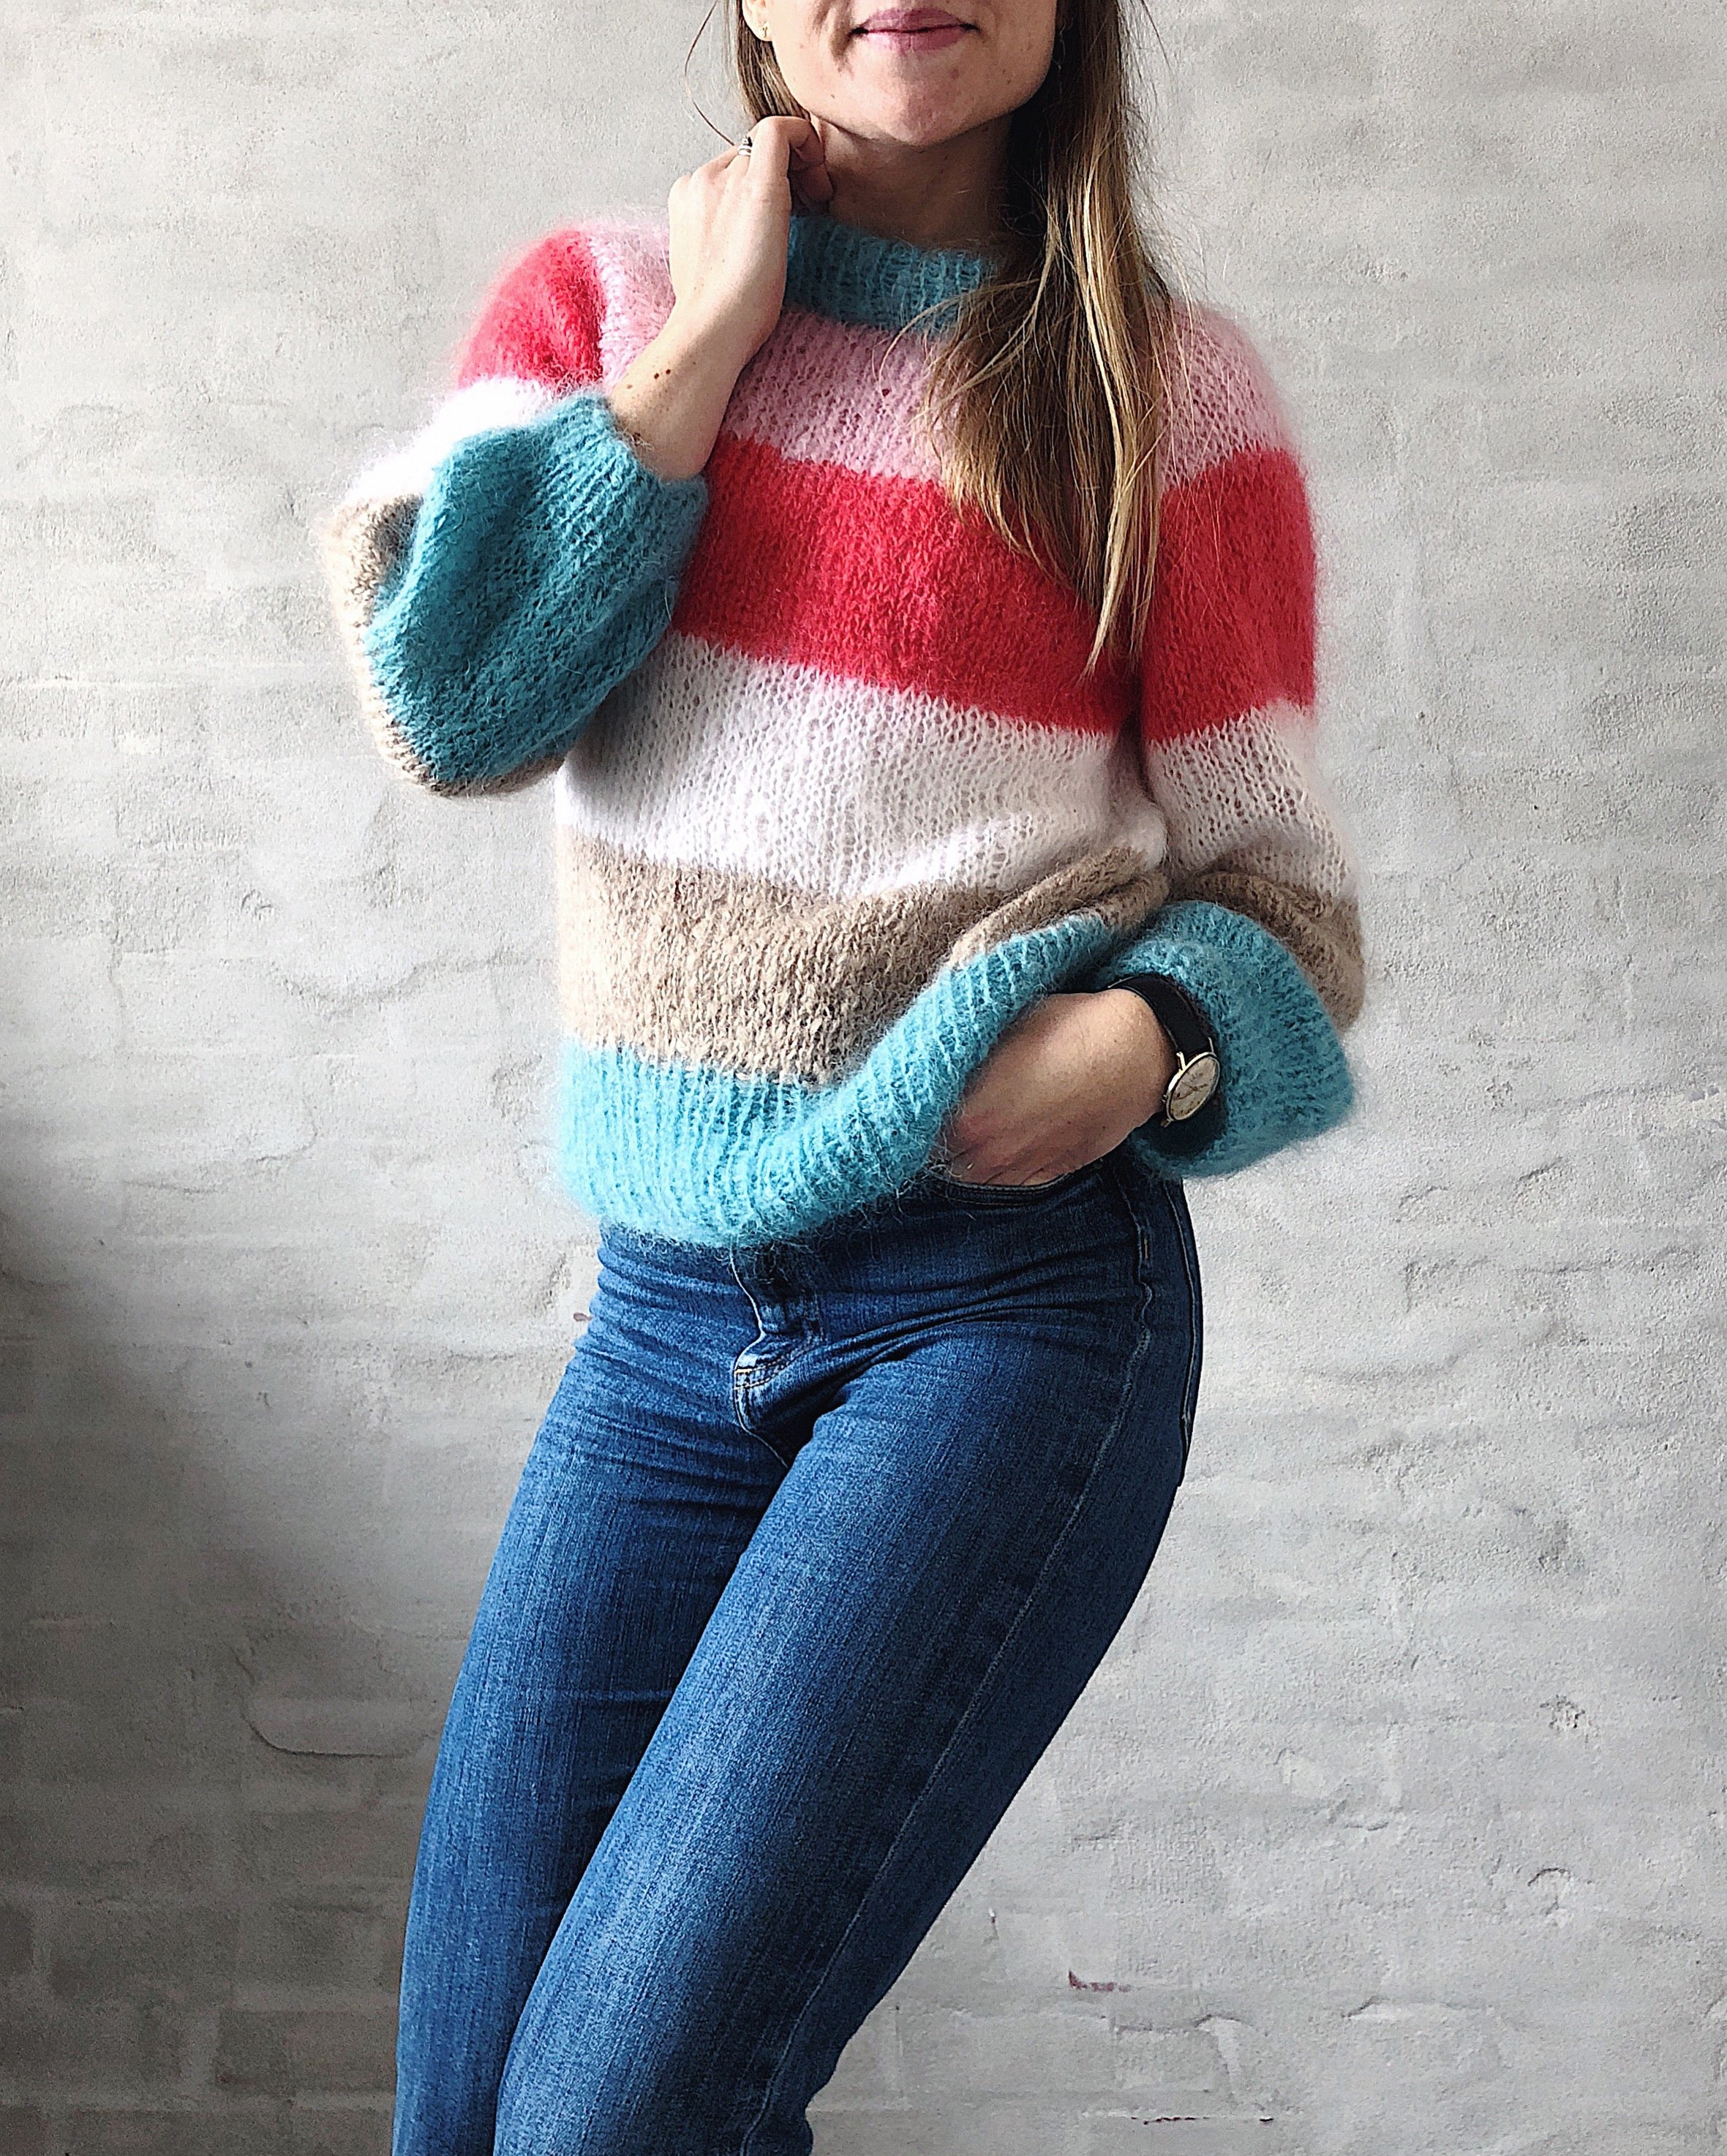 Chunky Sally Sweater – Mille Fryd Knitwear knitting patterns, Brede striber, Cashmere